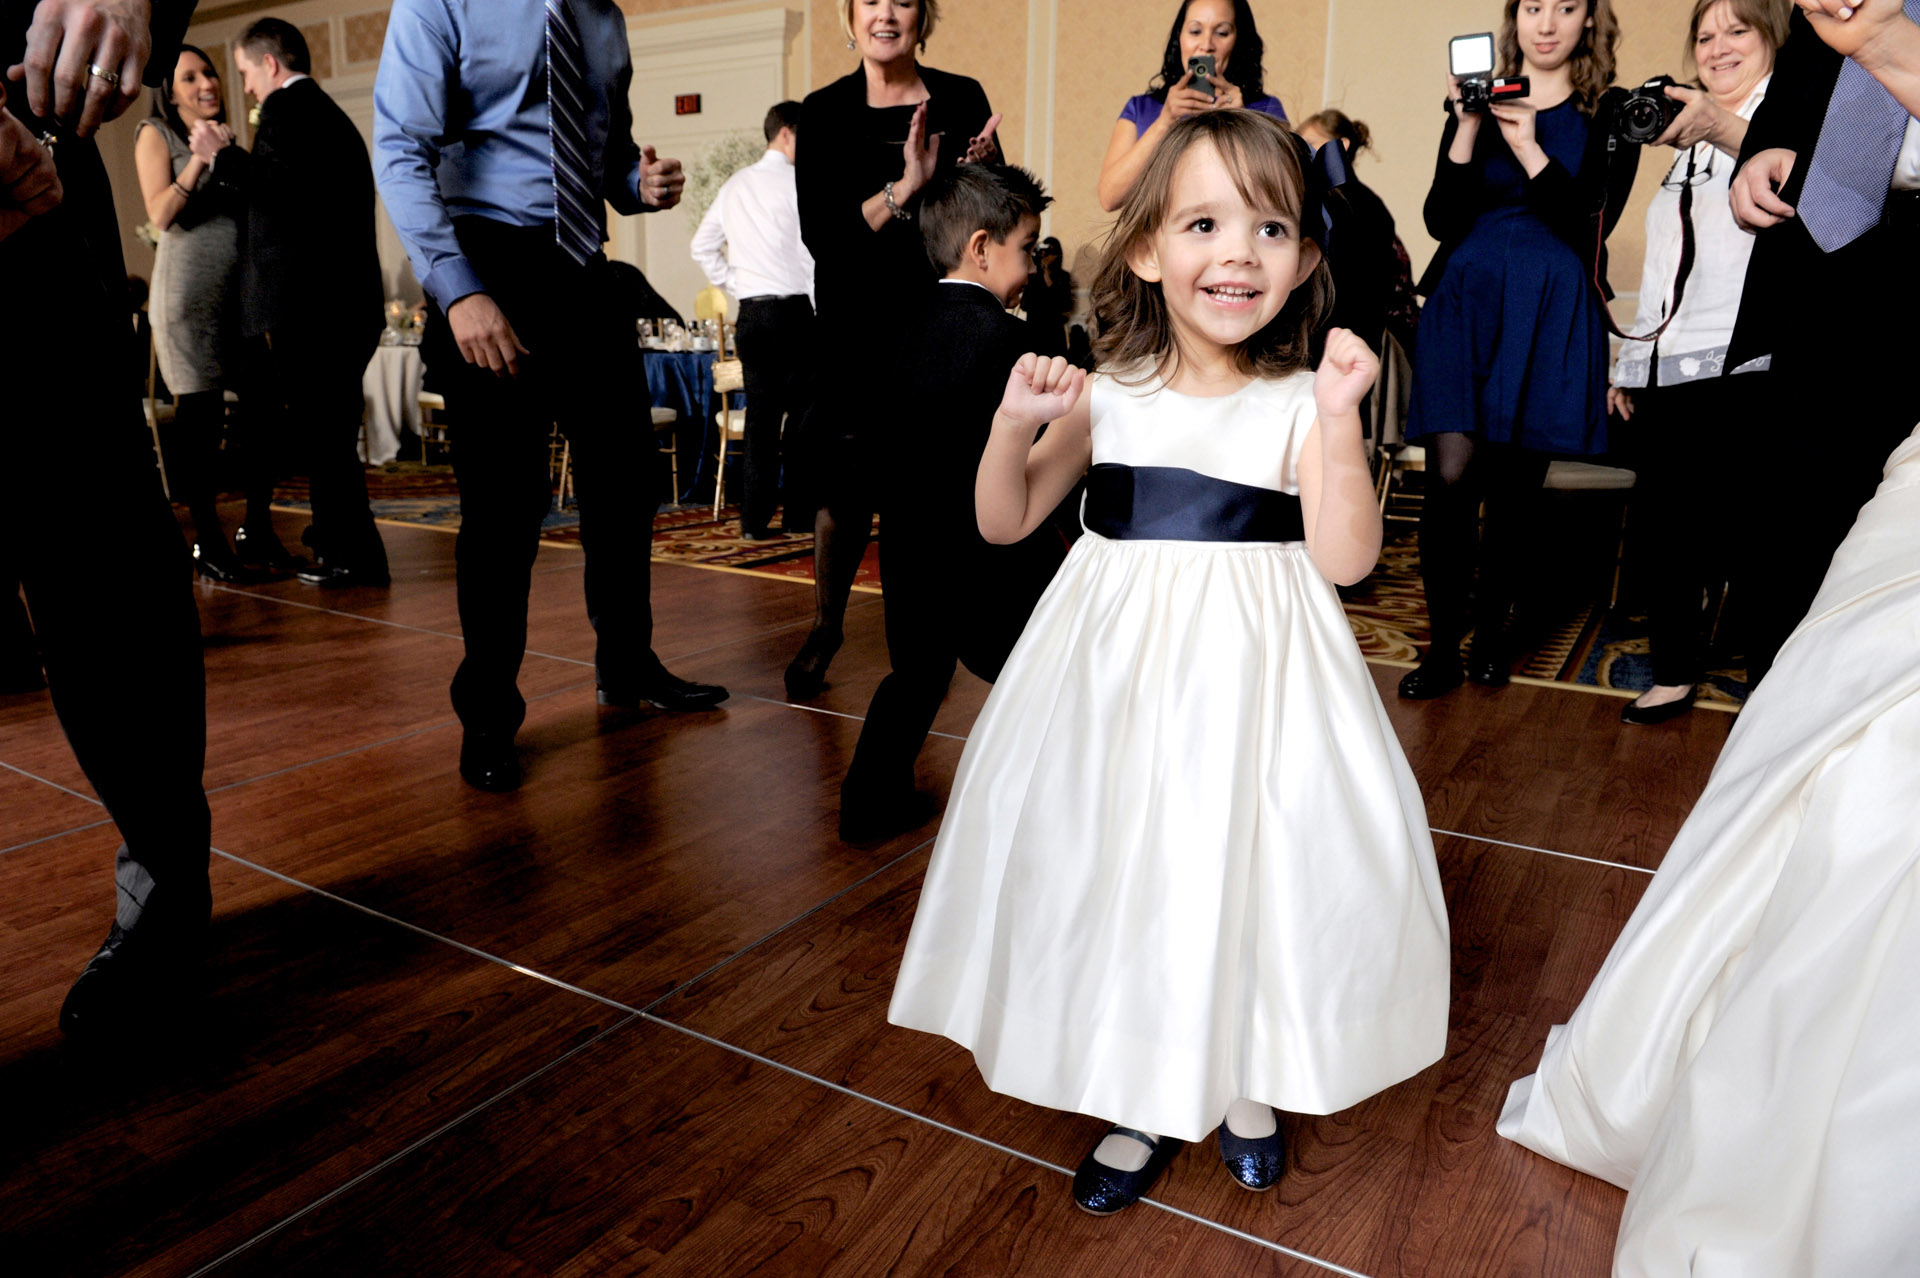 The Historic church Sweetest Heart of Mary and the Dearborn Inn of Detroit's historic church in Detroit and Dearborn, Michigan wedding photographer's photo of a couple of the flower girl dancing at the wedding reception at the Dearborn Inn in Dearborn, Michigan.